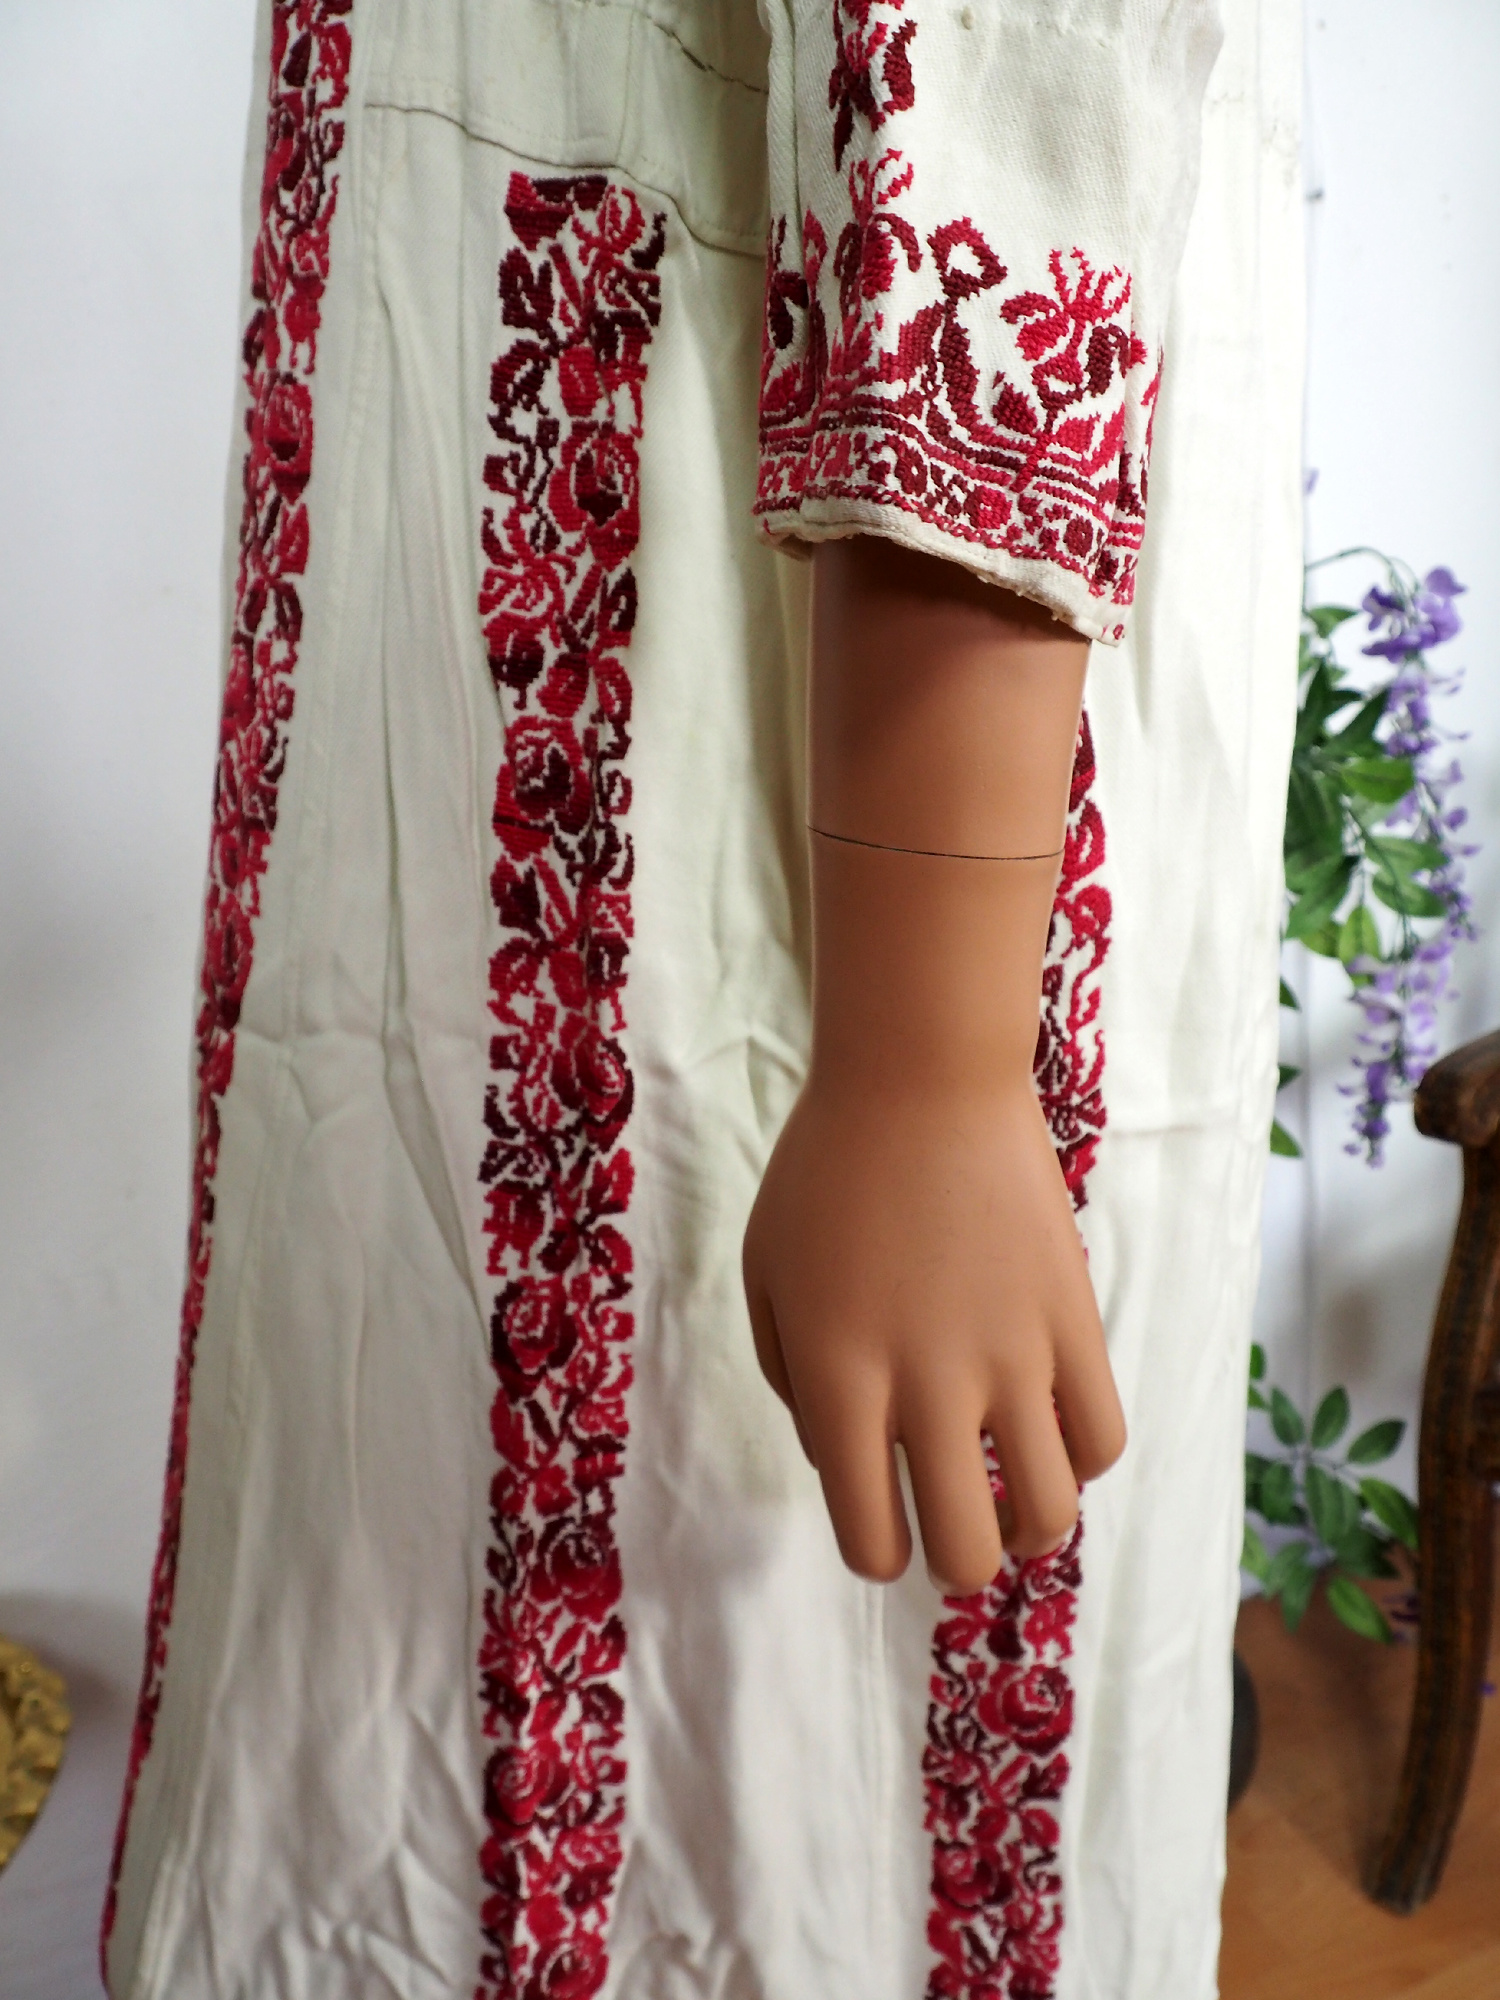 Palestinian girls embroidered ethnic dress No:6